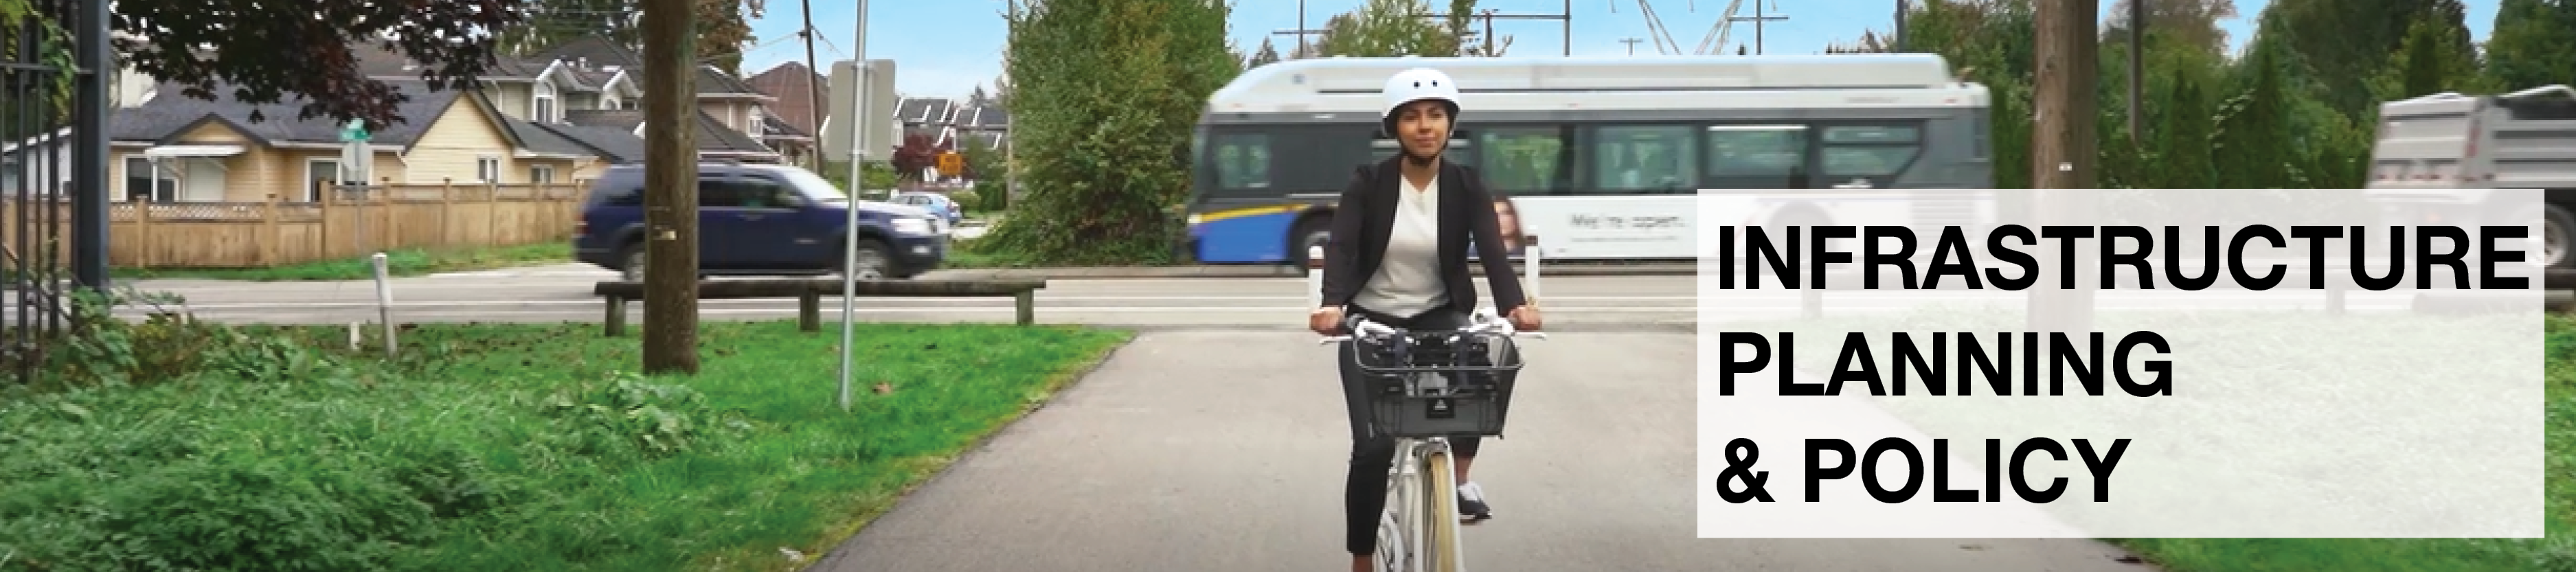 Infrastructure Planning & Policy. A woman rides her bike along a multi-use path in Surrey. Behind her we see a vehicle and a bus drive by on the road.